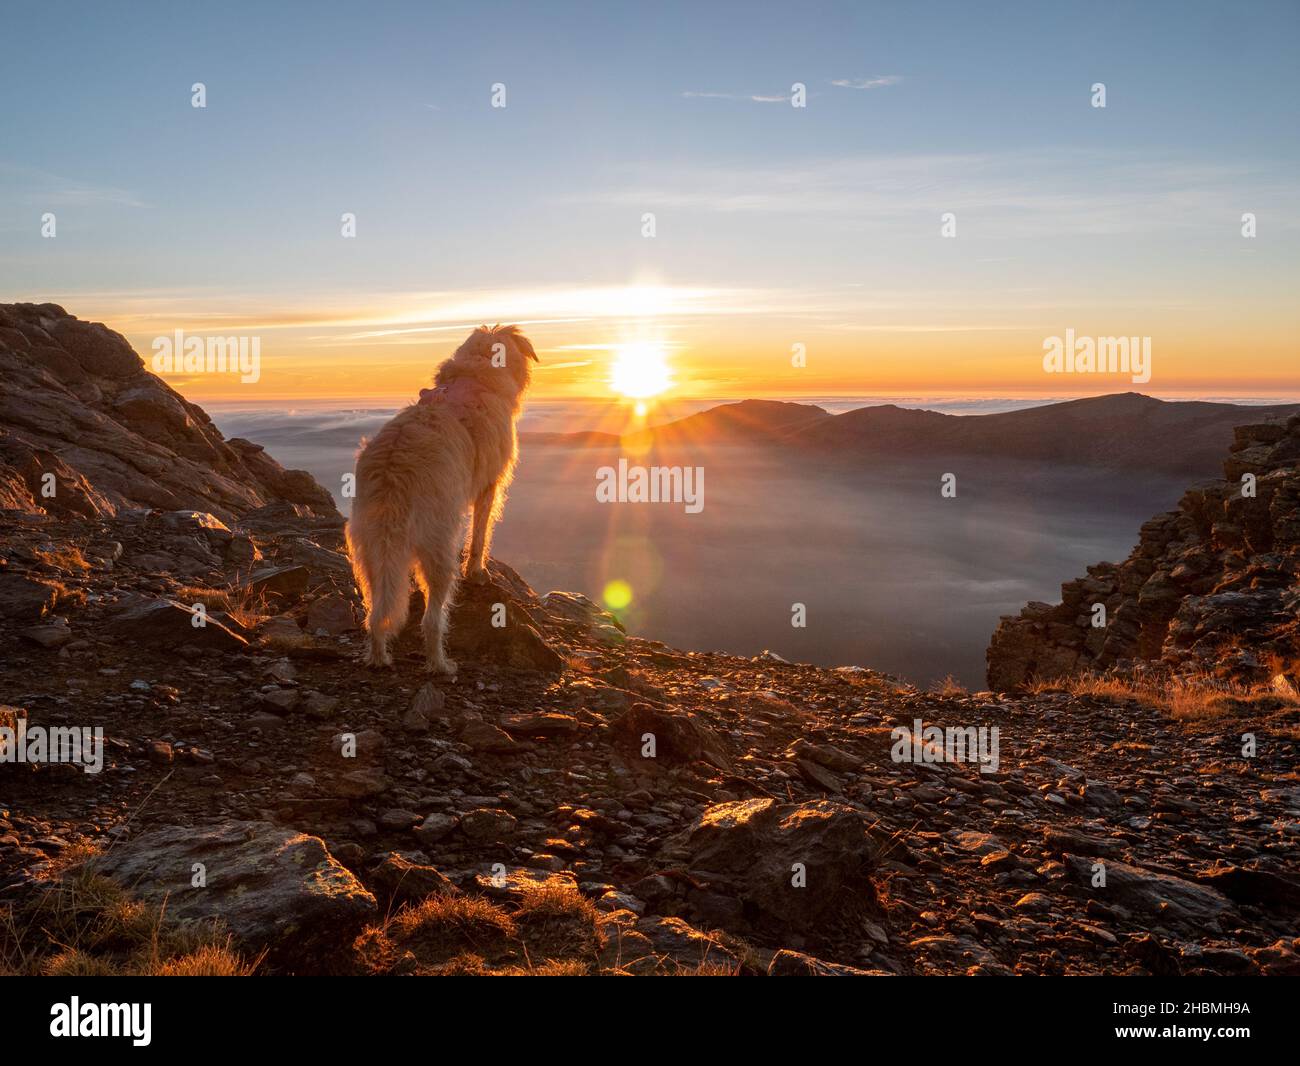 A view of a Huntaway dog on the top of a mountain looking out at sunset against a cloudy sky Stock Photo